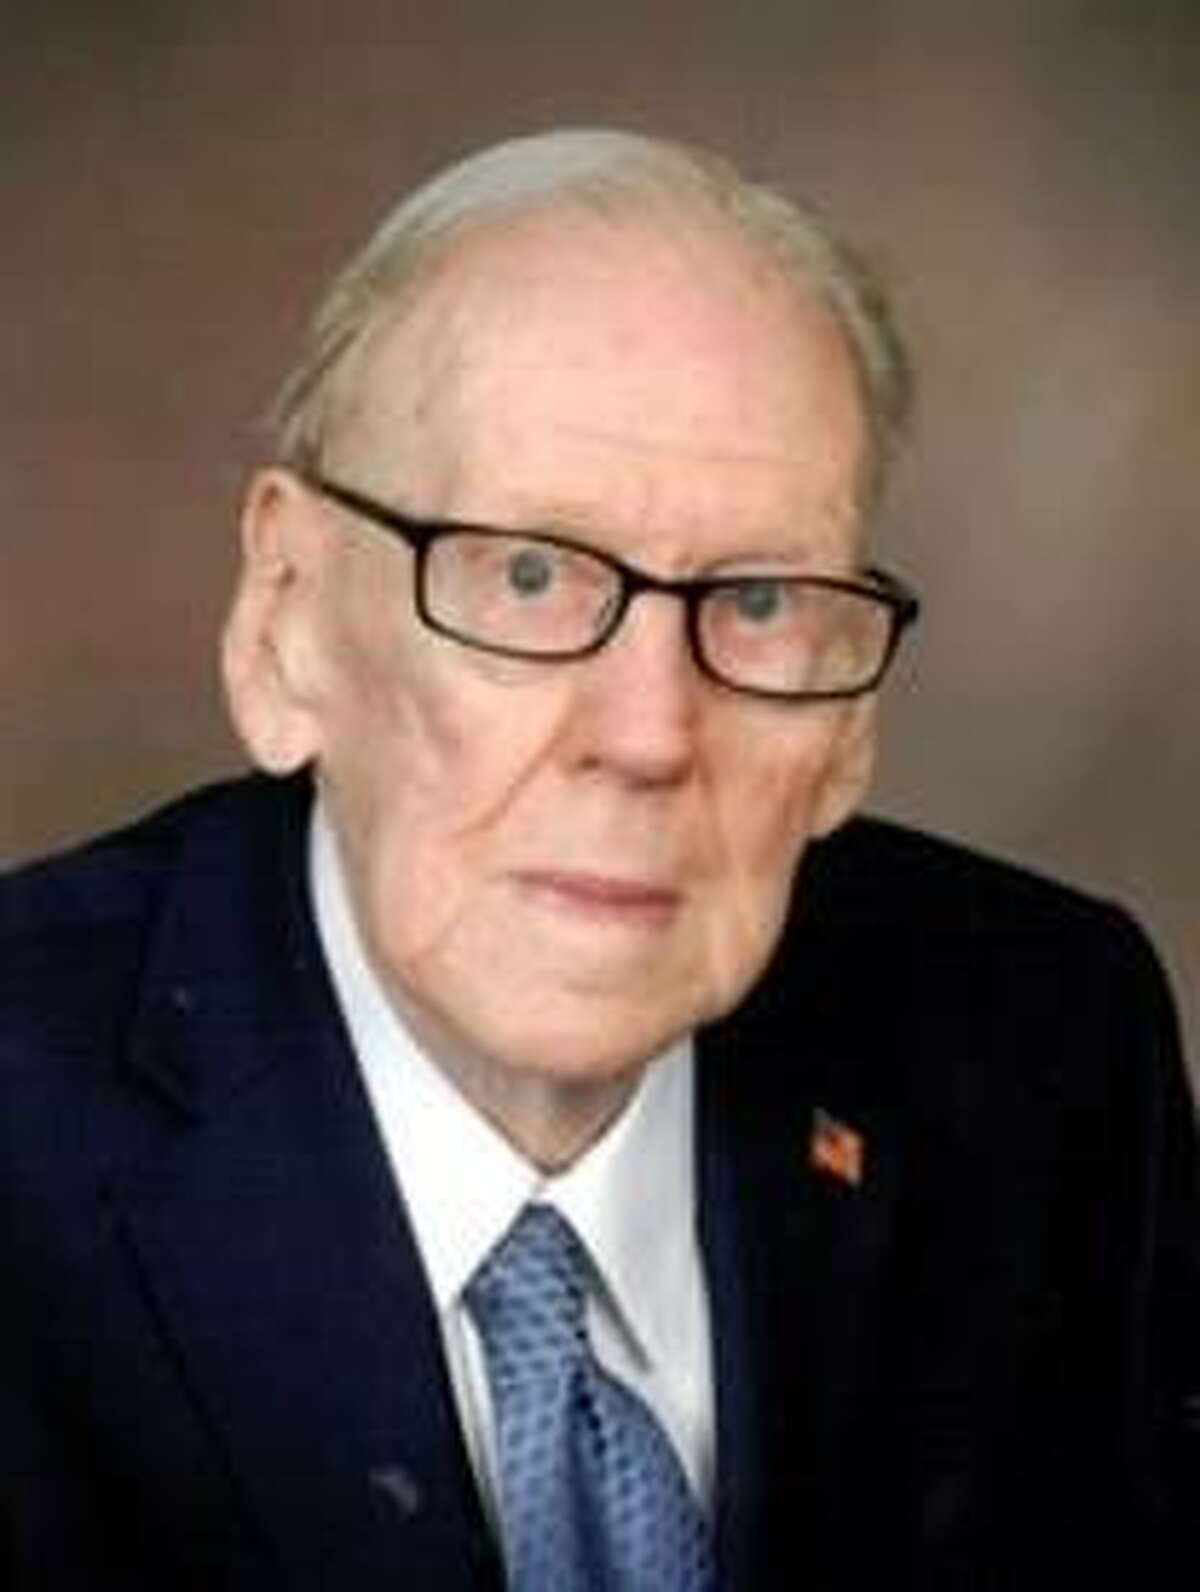 Harold W. “Red” Rethmann worked for Southwest Research Institute after leaving the Air Force.